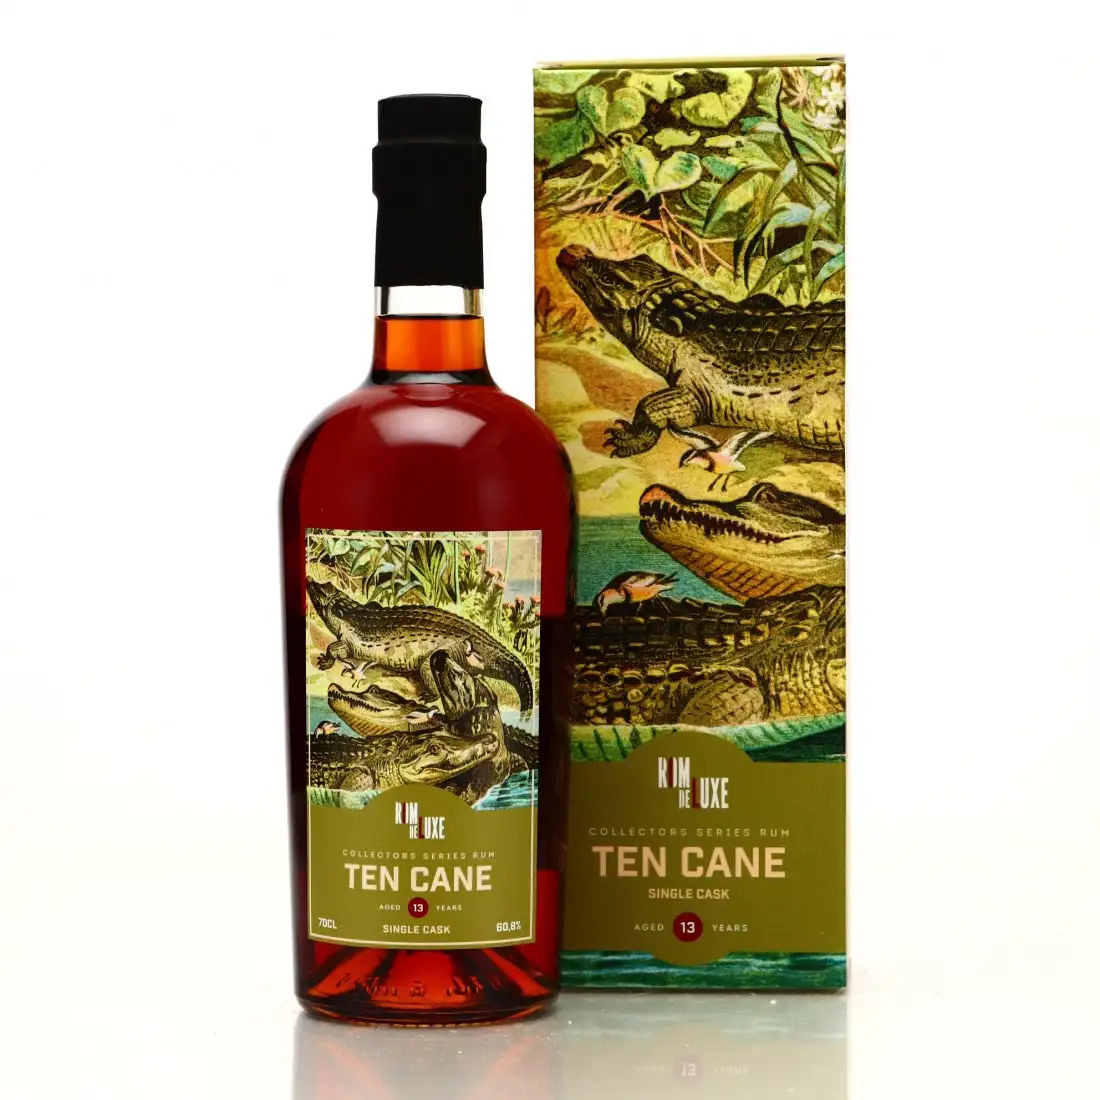 Image of the front of the bottle of the rum Collectors Series No. 6 BTXCA